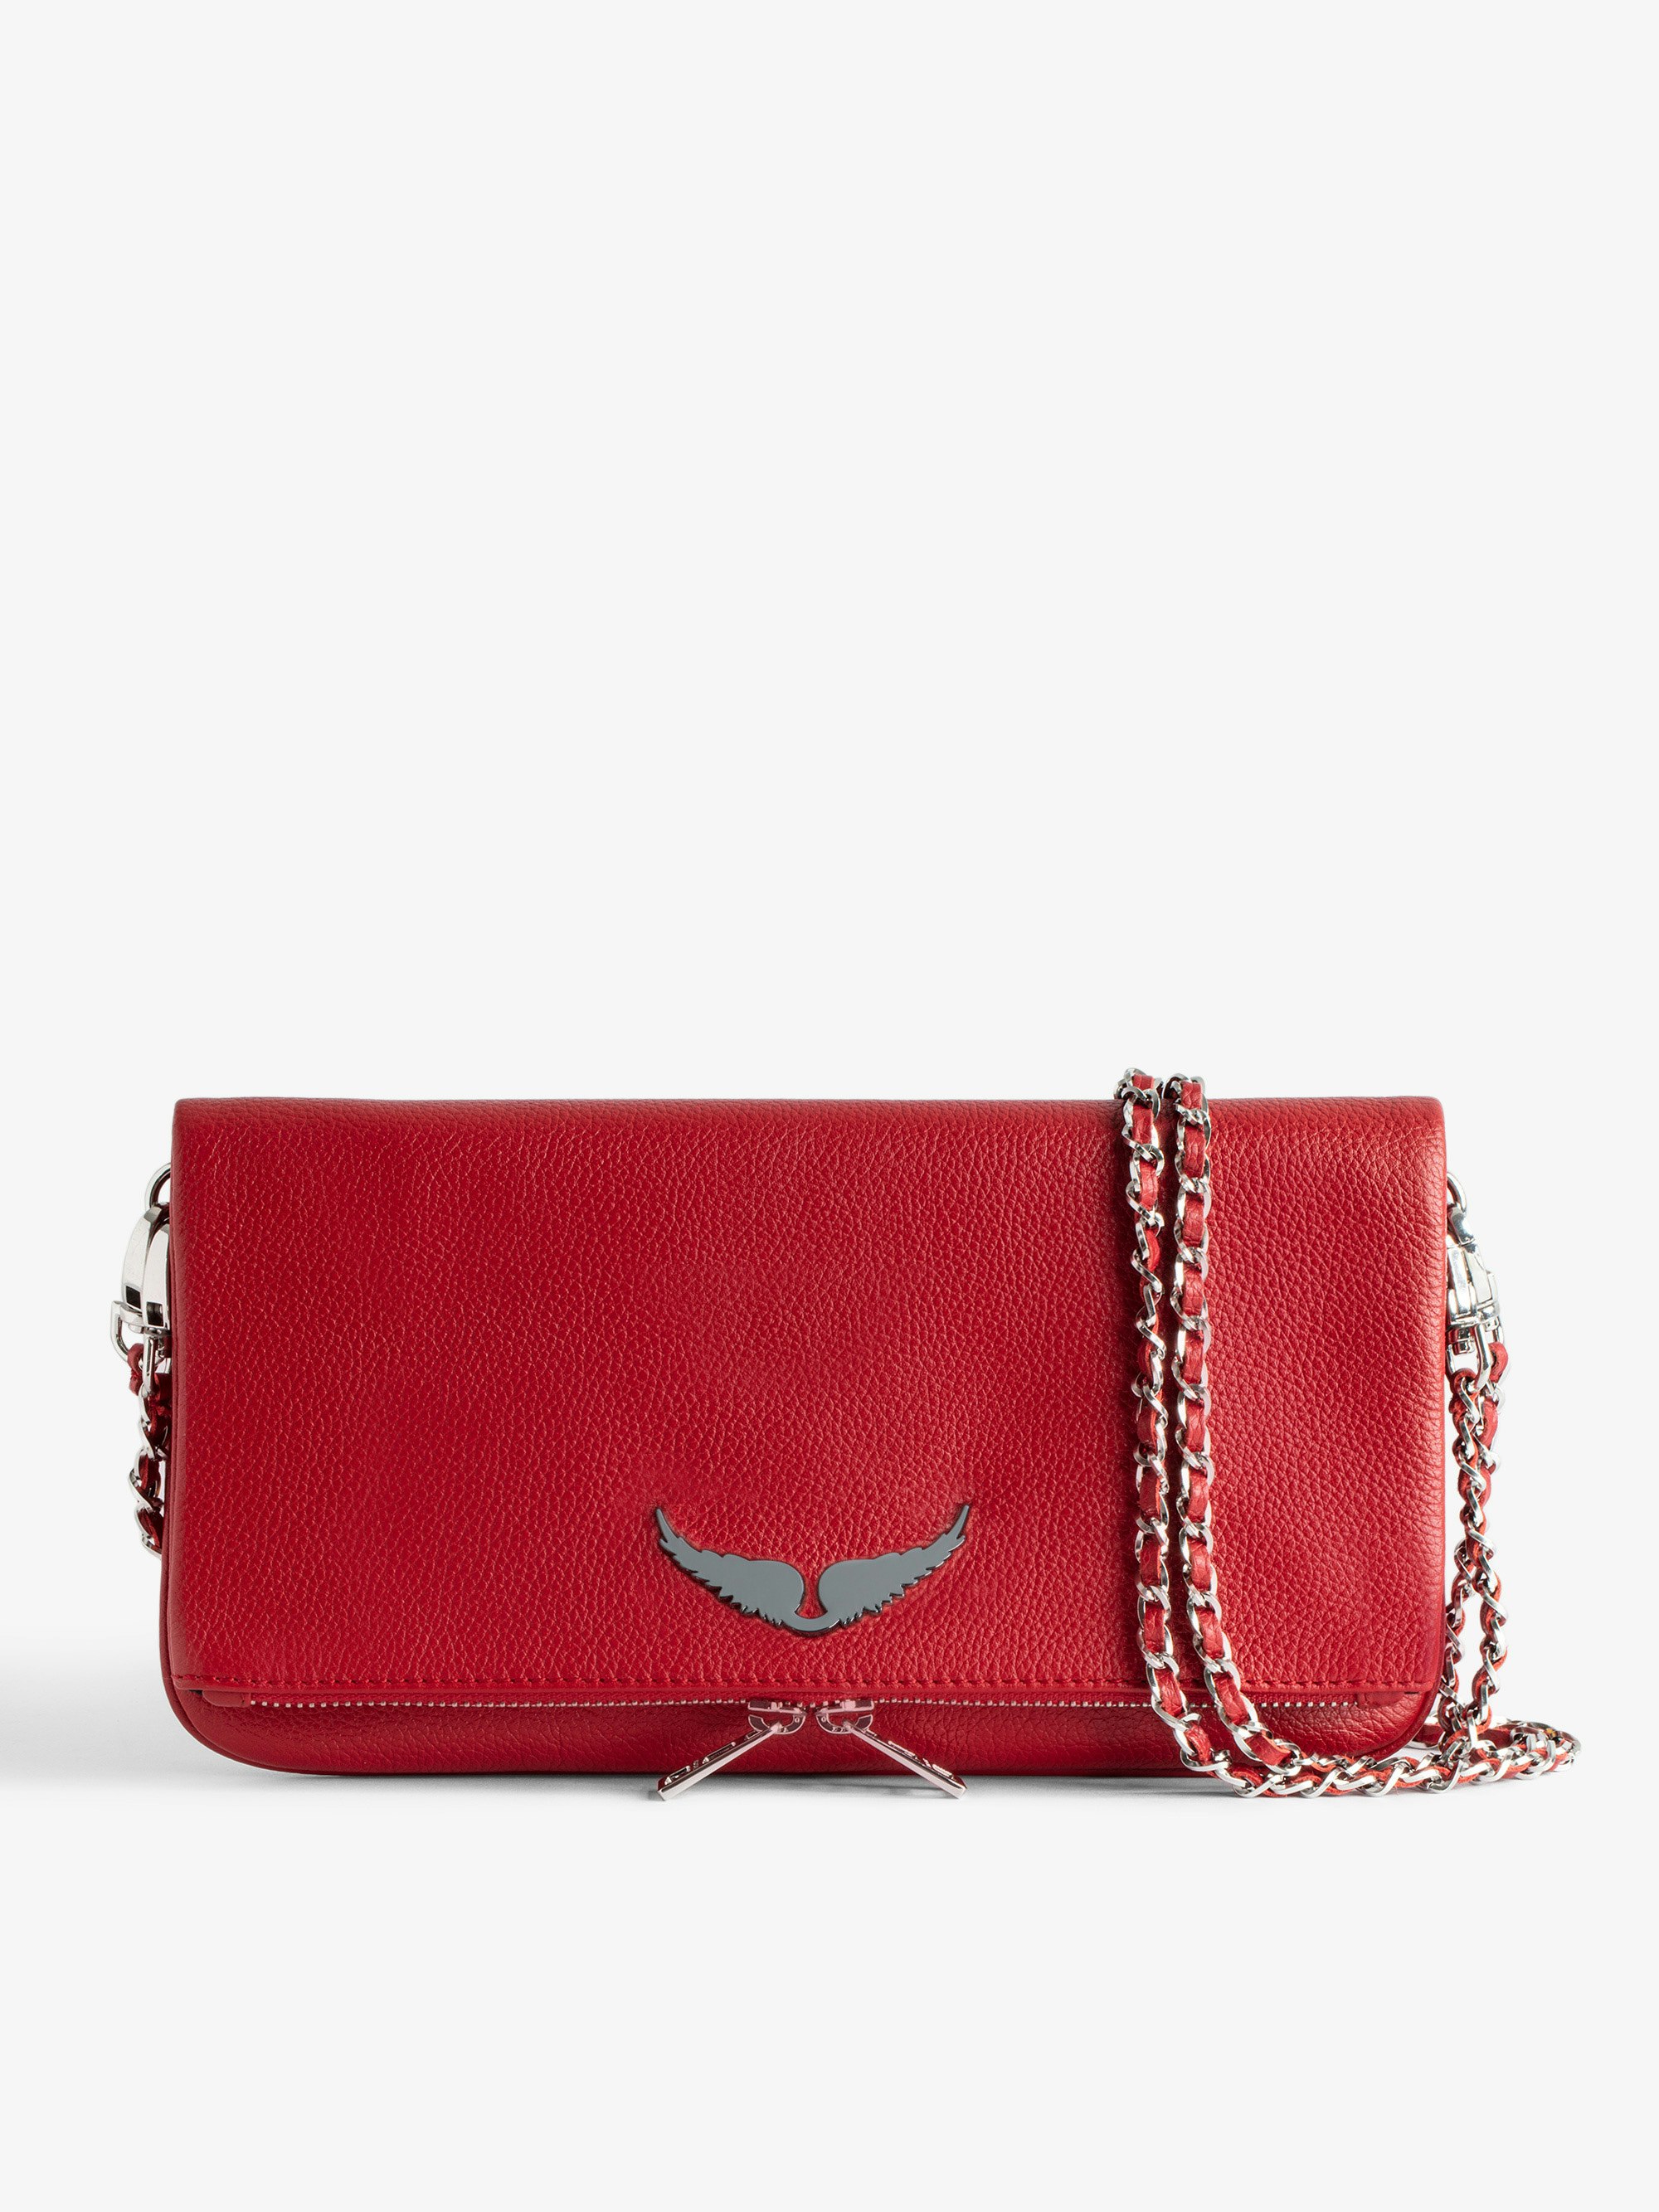 Rock Clutch - Women’s red grained leather clutch bag with double leather and metal chain strap.